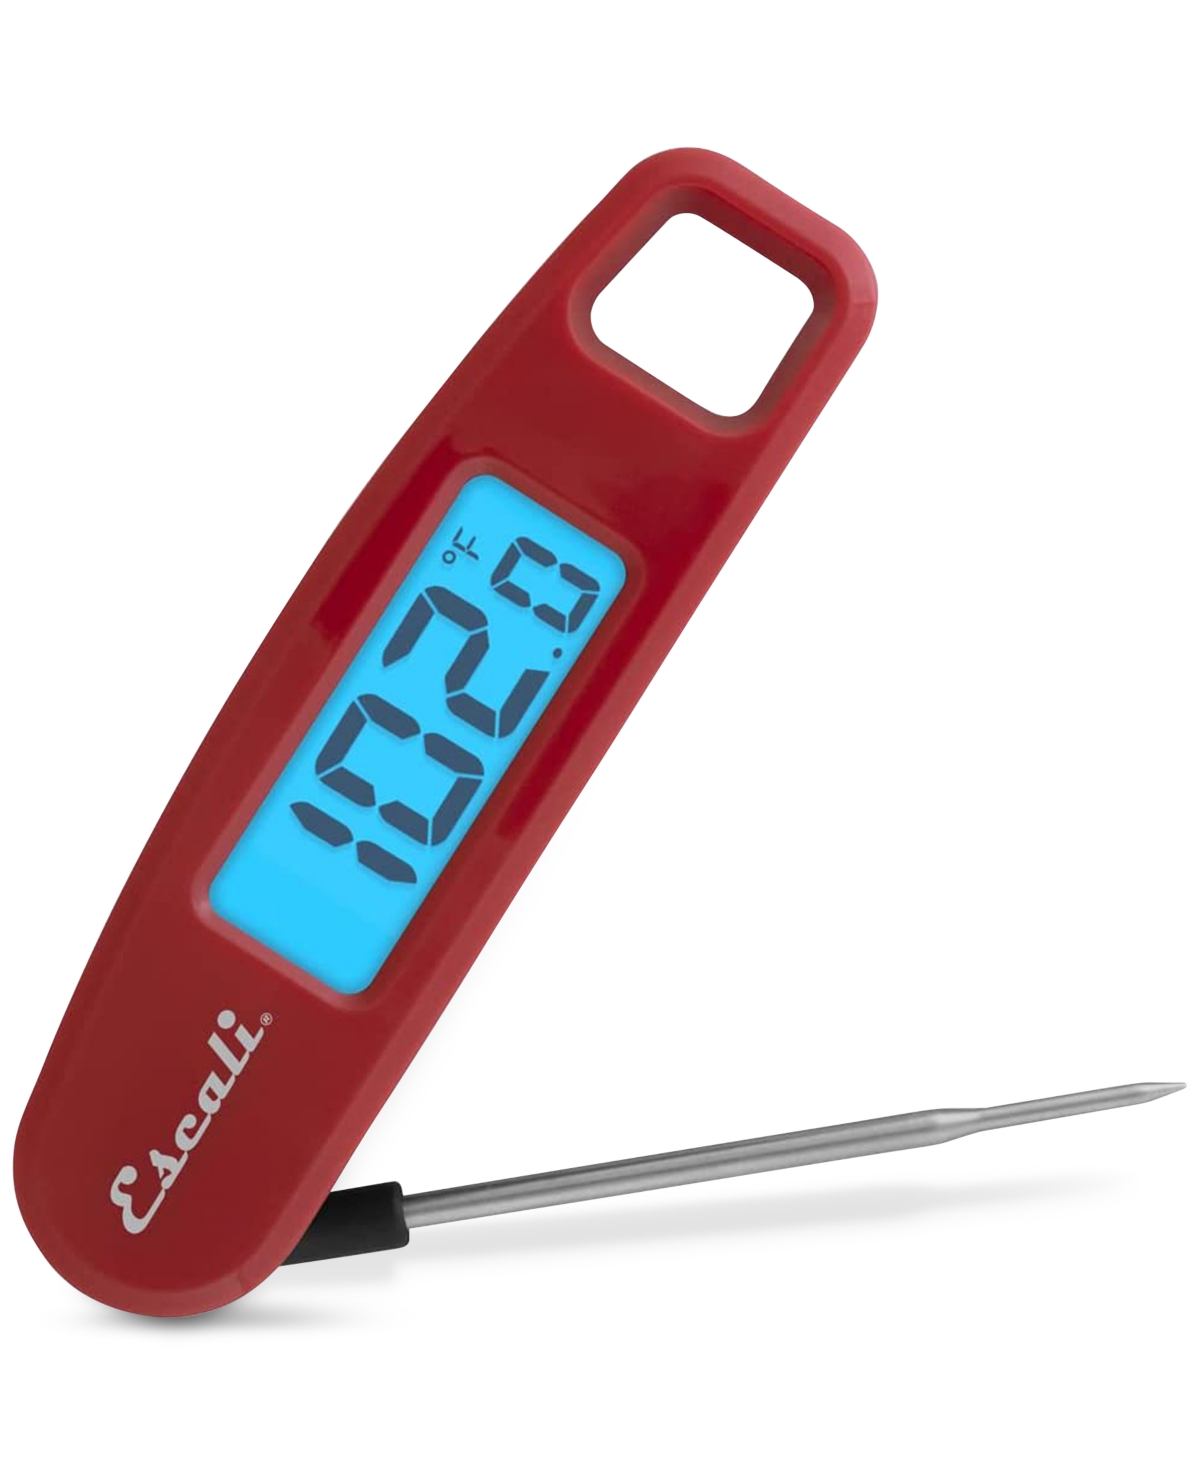 Escali Compact Folding Digital Thermometer In Red